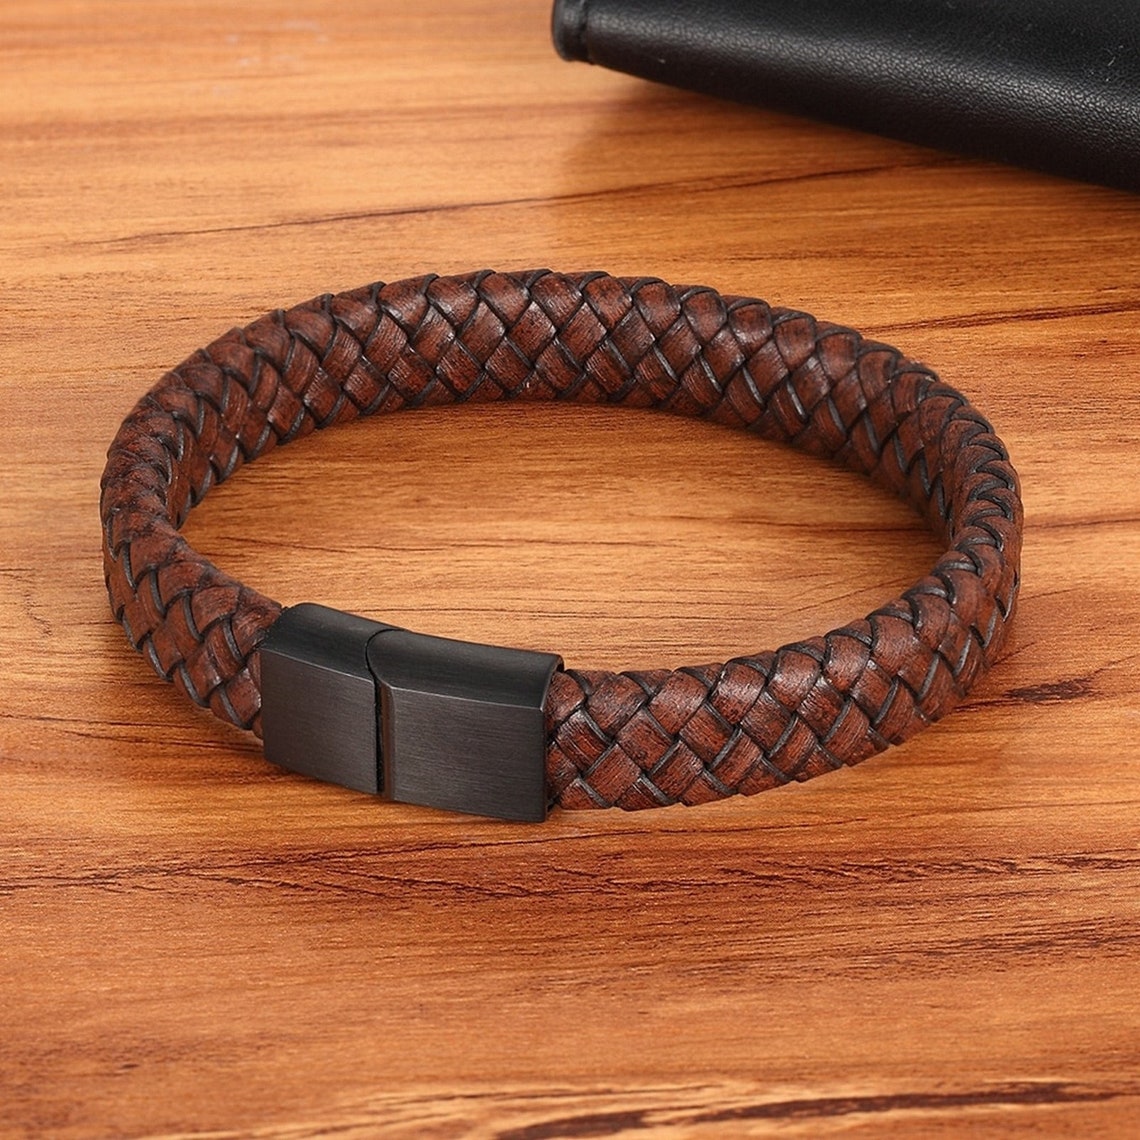 Men's Brown Leather Bracelet, Braided and Woven Leather, Stainless ...